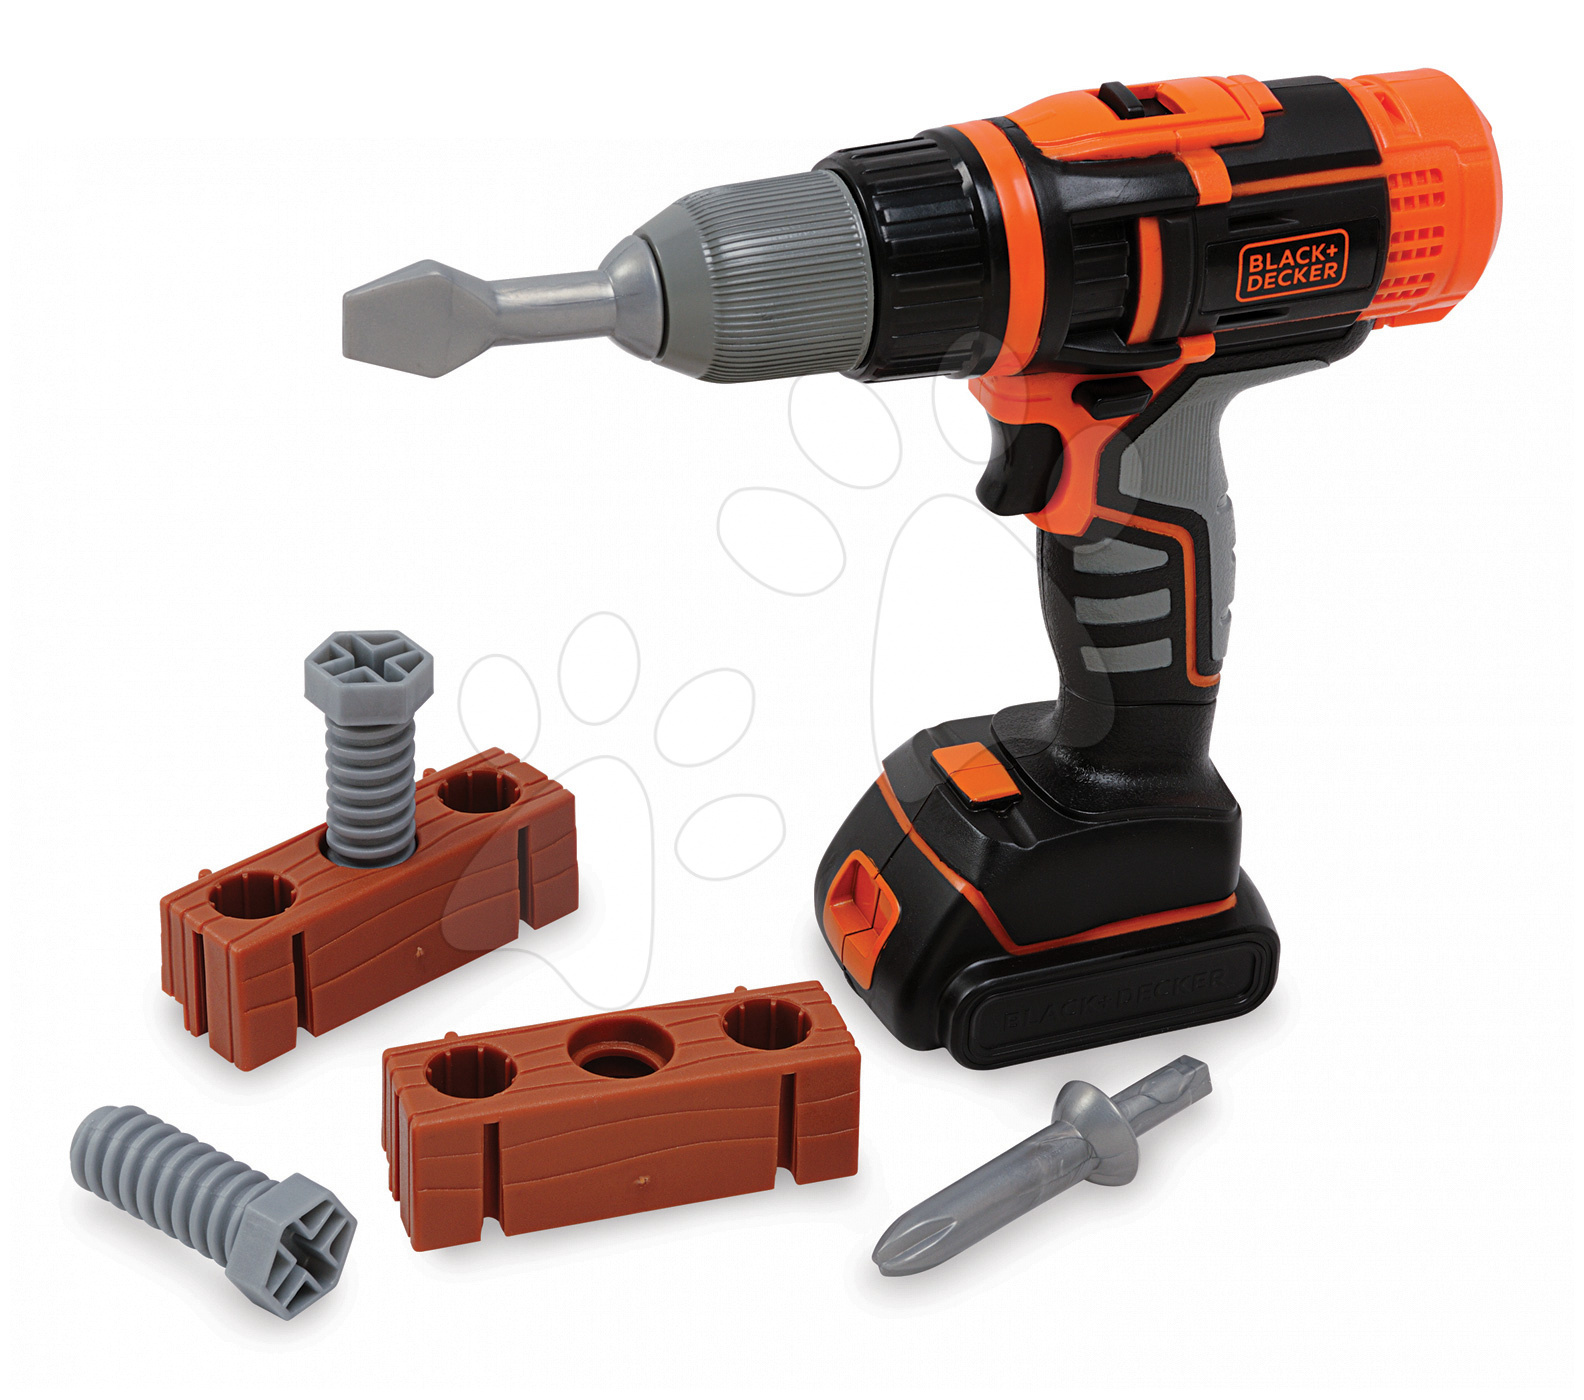 Play tools - Smoby Black+Decker Power Drill For Children mechanical, with accessories